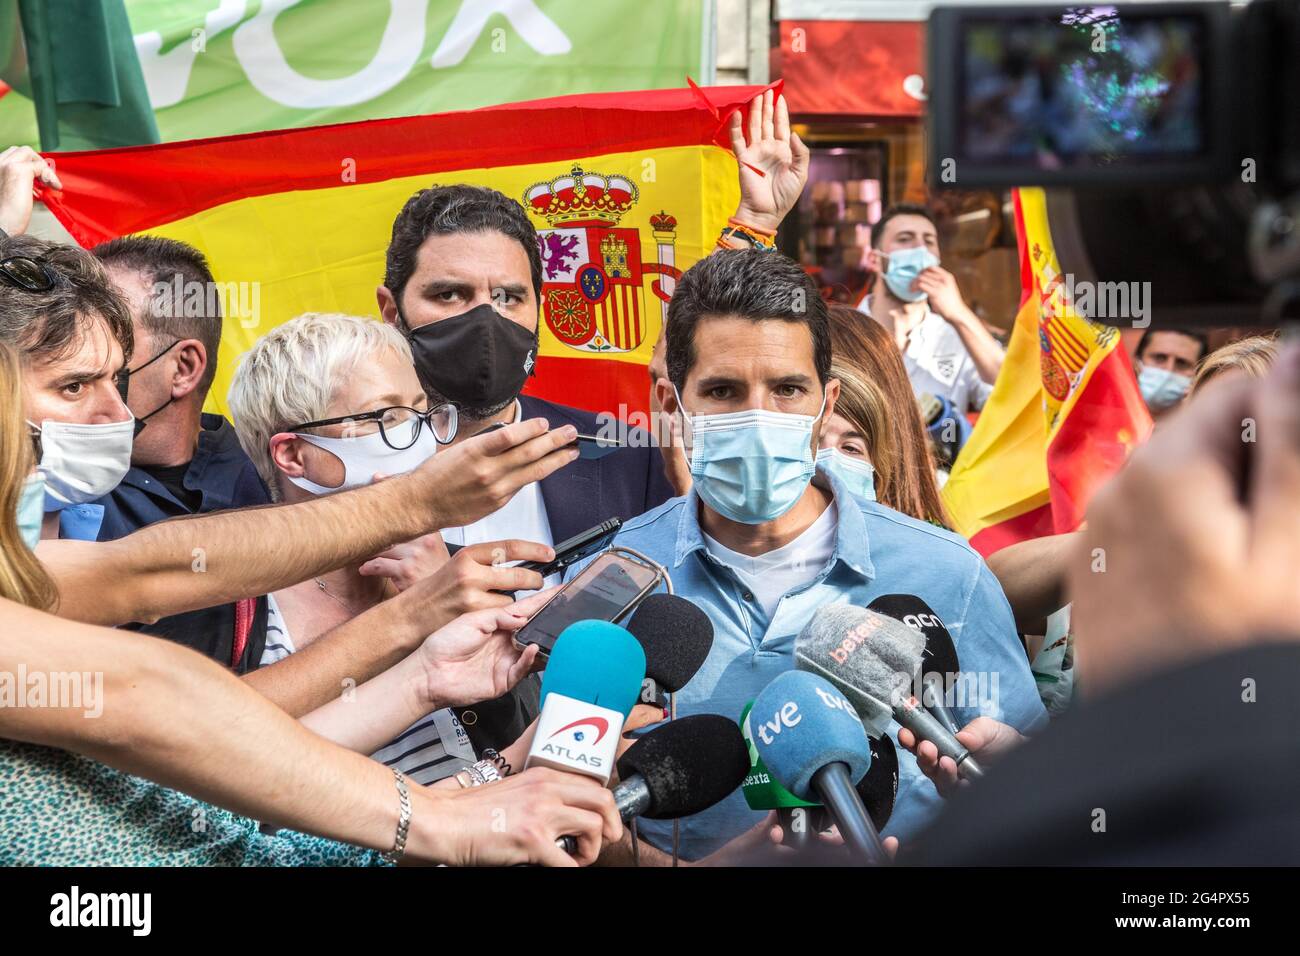 Barcelona, Spain. 22nd June, 2021. Nacho Martin Blanco, Deputy in the Parliament of Catalonia speaks to press during the demonstration.The Spanish far-right party, Vox, together with the political party, Ciudadanos, have called a demonstration in Barcelona's Artos Square, a regular place for far-right rallies, against the President of the Spanish Government, Pedro Sanchez, for the decision to pardon the prisoners Catalan independence politicians. Credit: SOPA Images Limited/Alamy Live News Stock Photo